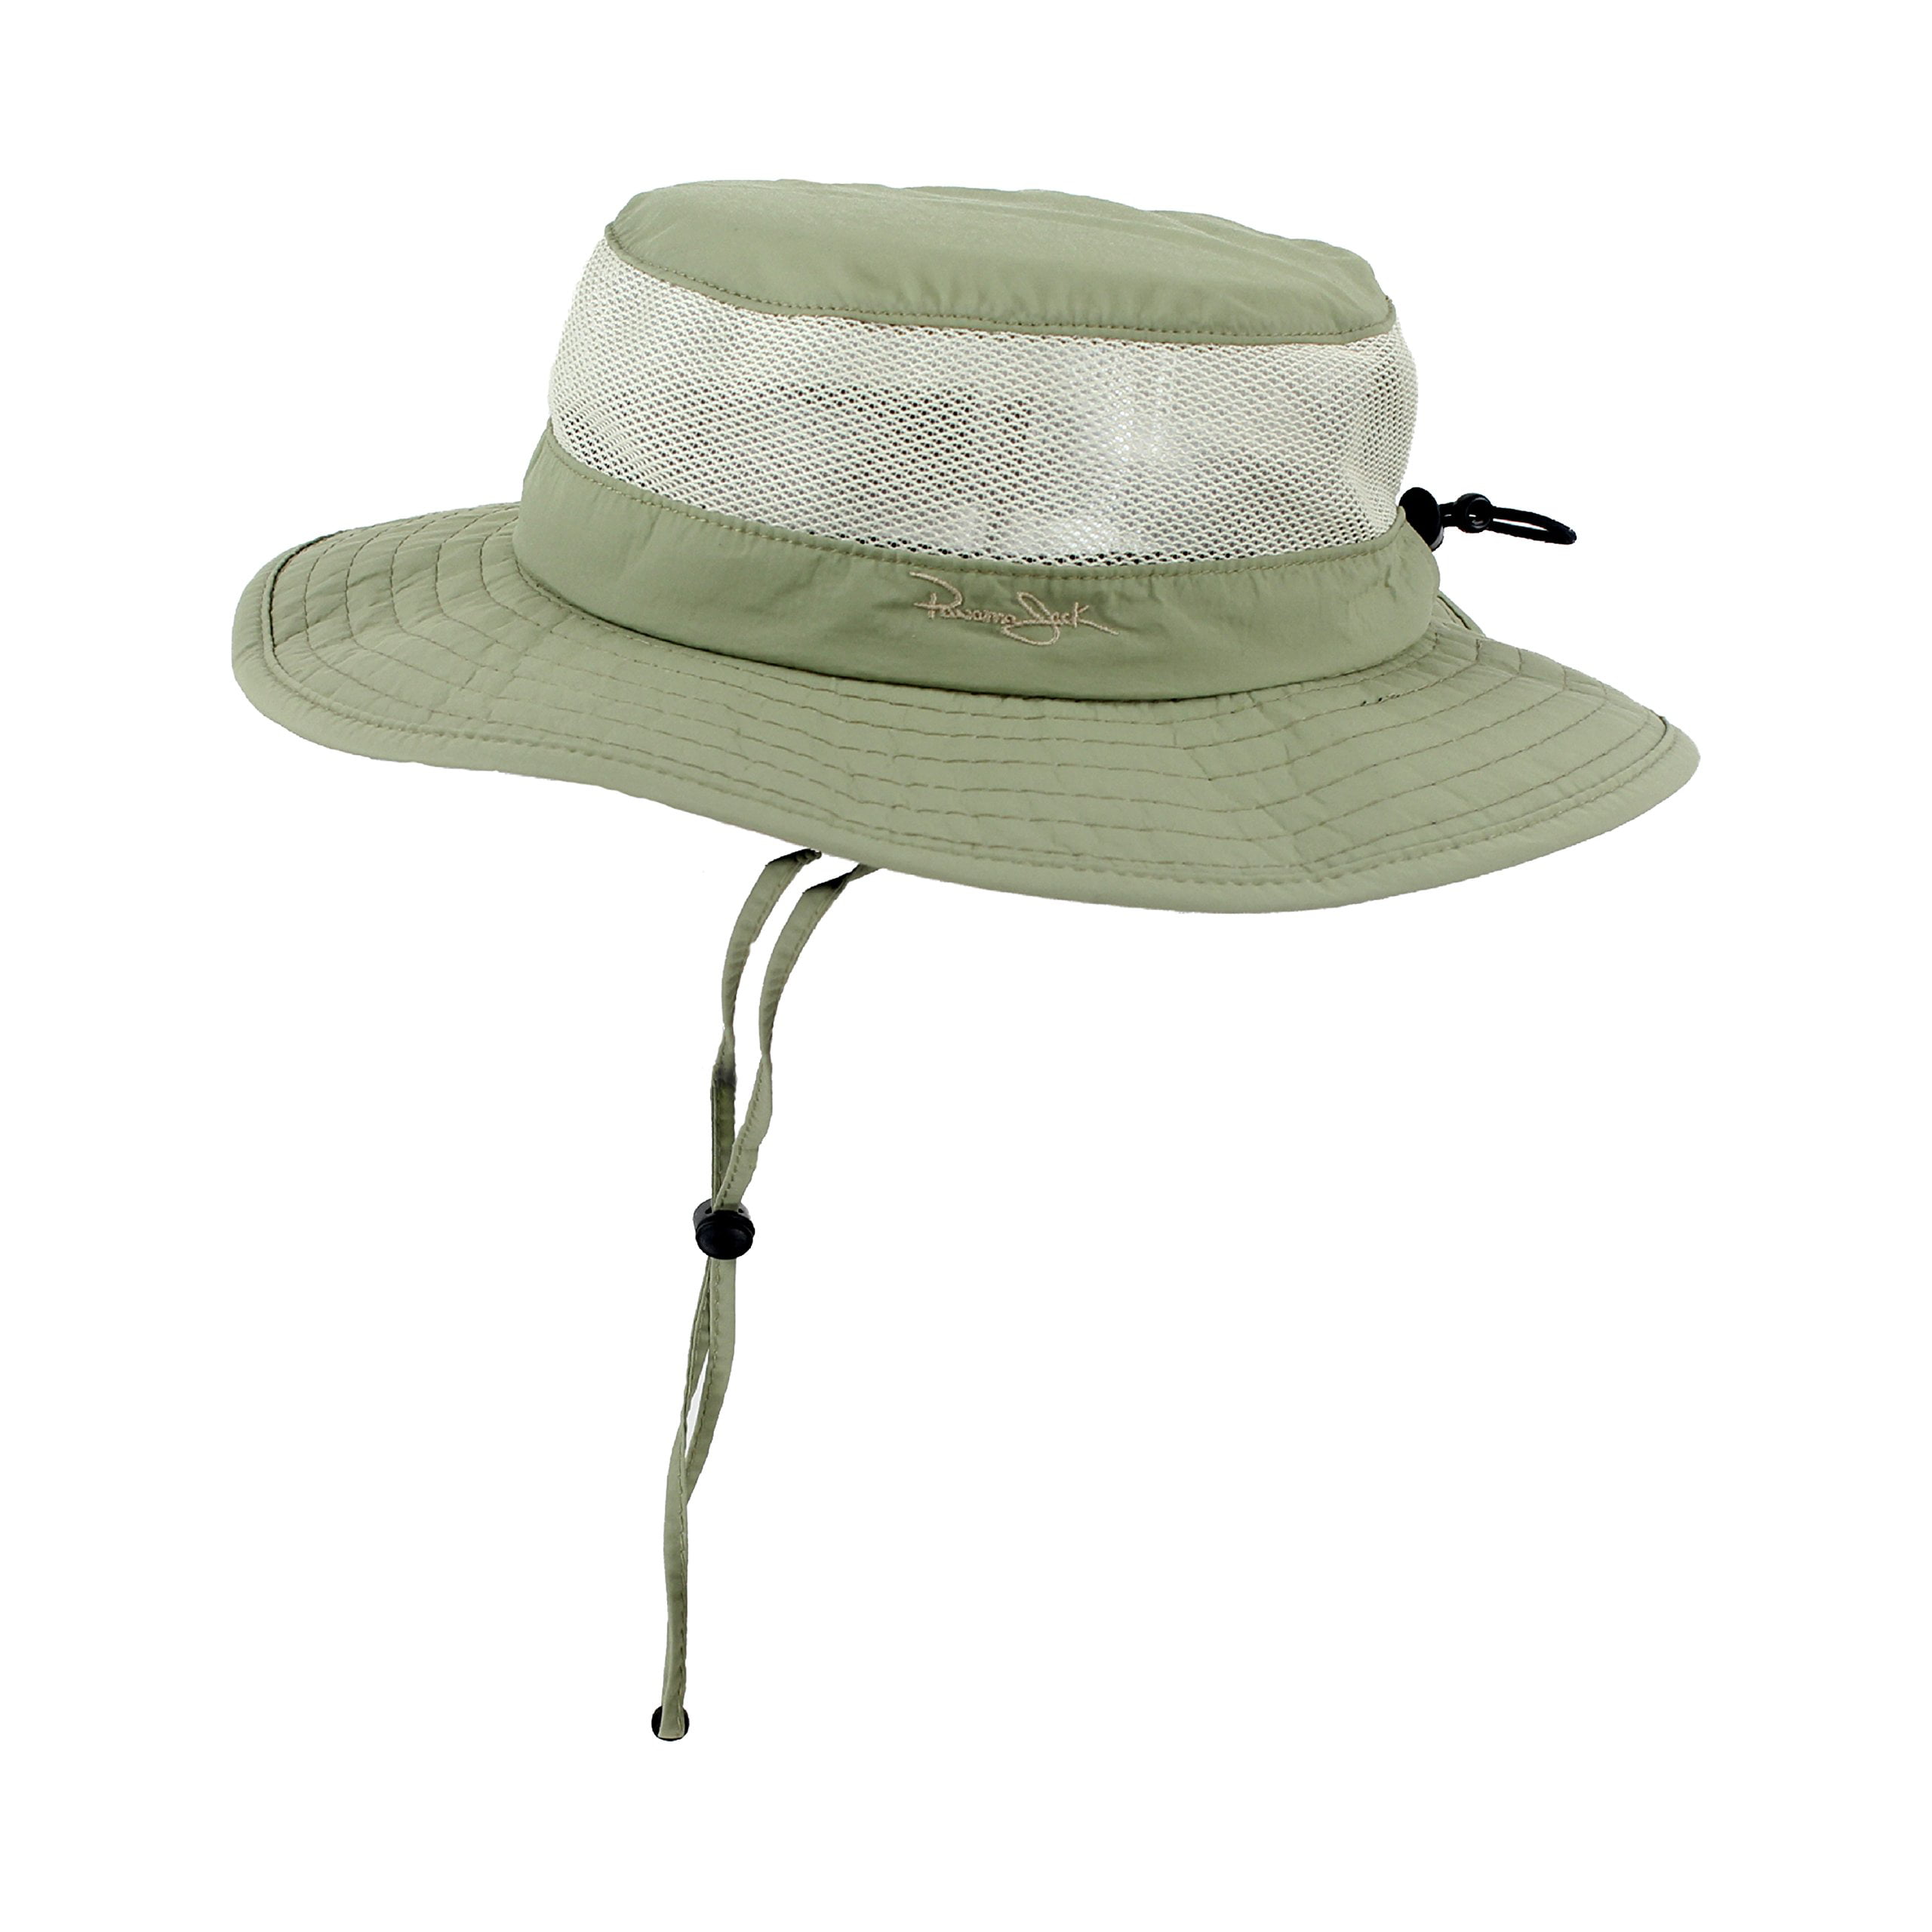 Foldable Boonie Fishing UV Sun Hat w//Vented Mesh Hiking /& Outdoor Cap SPF 50+